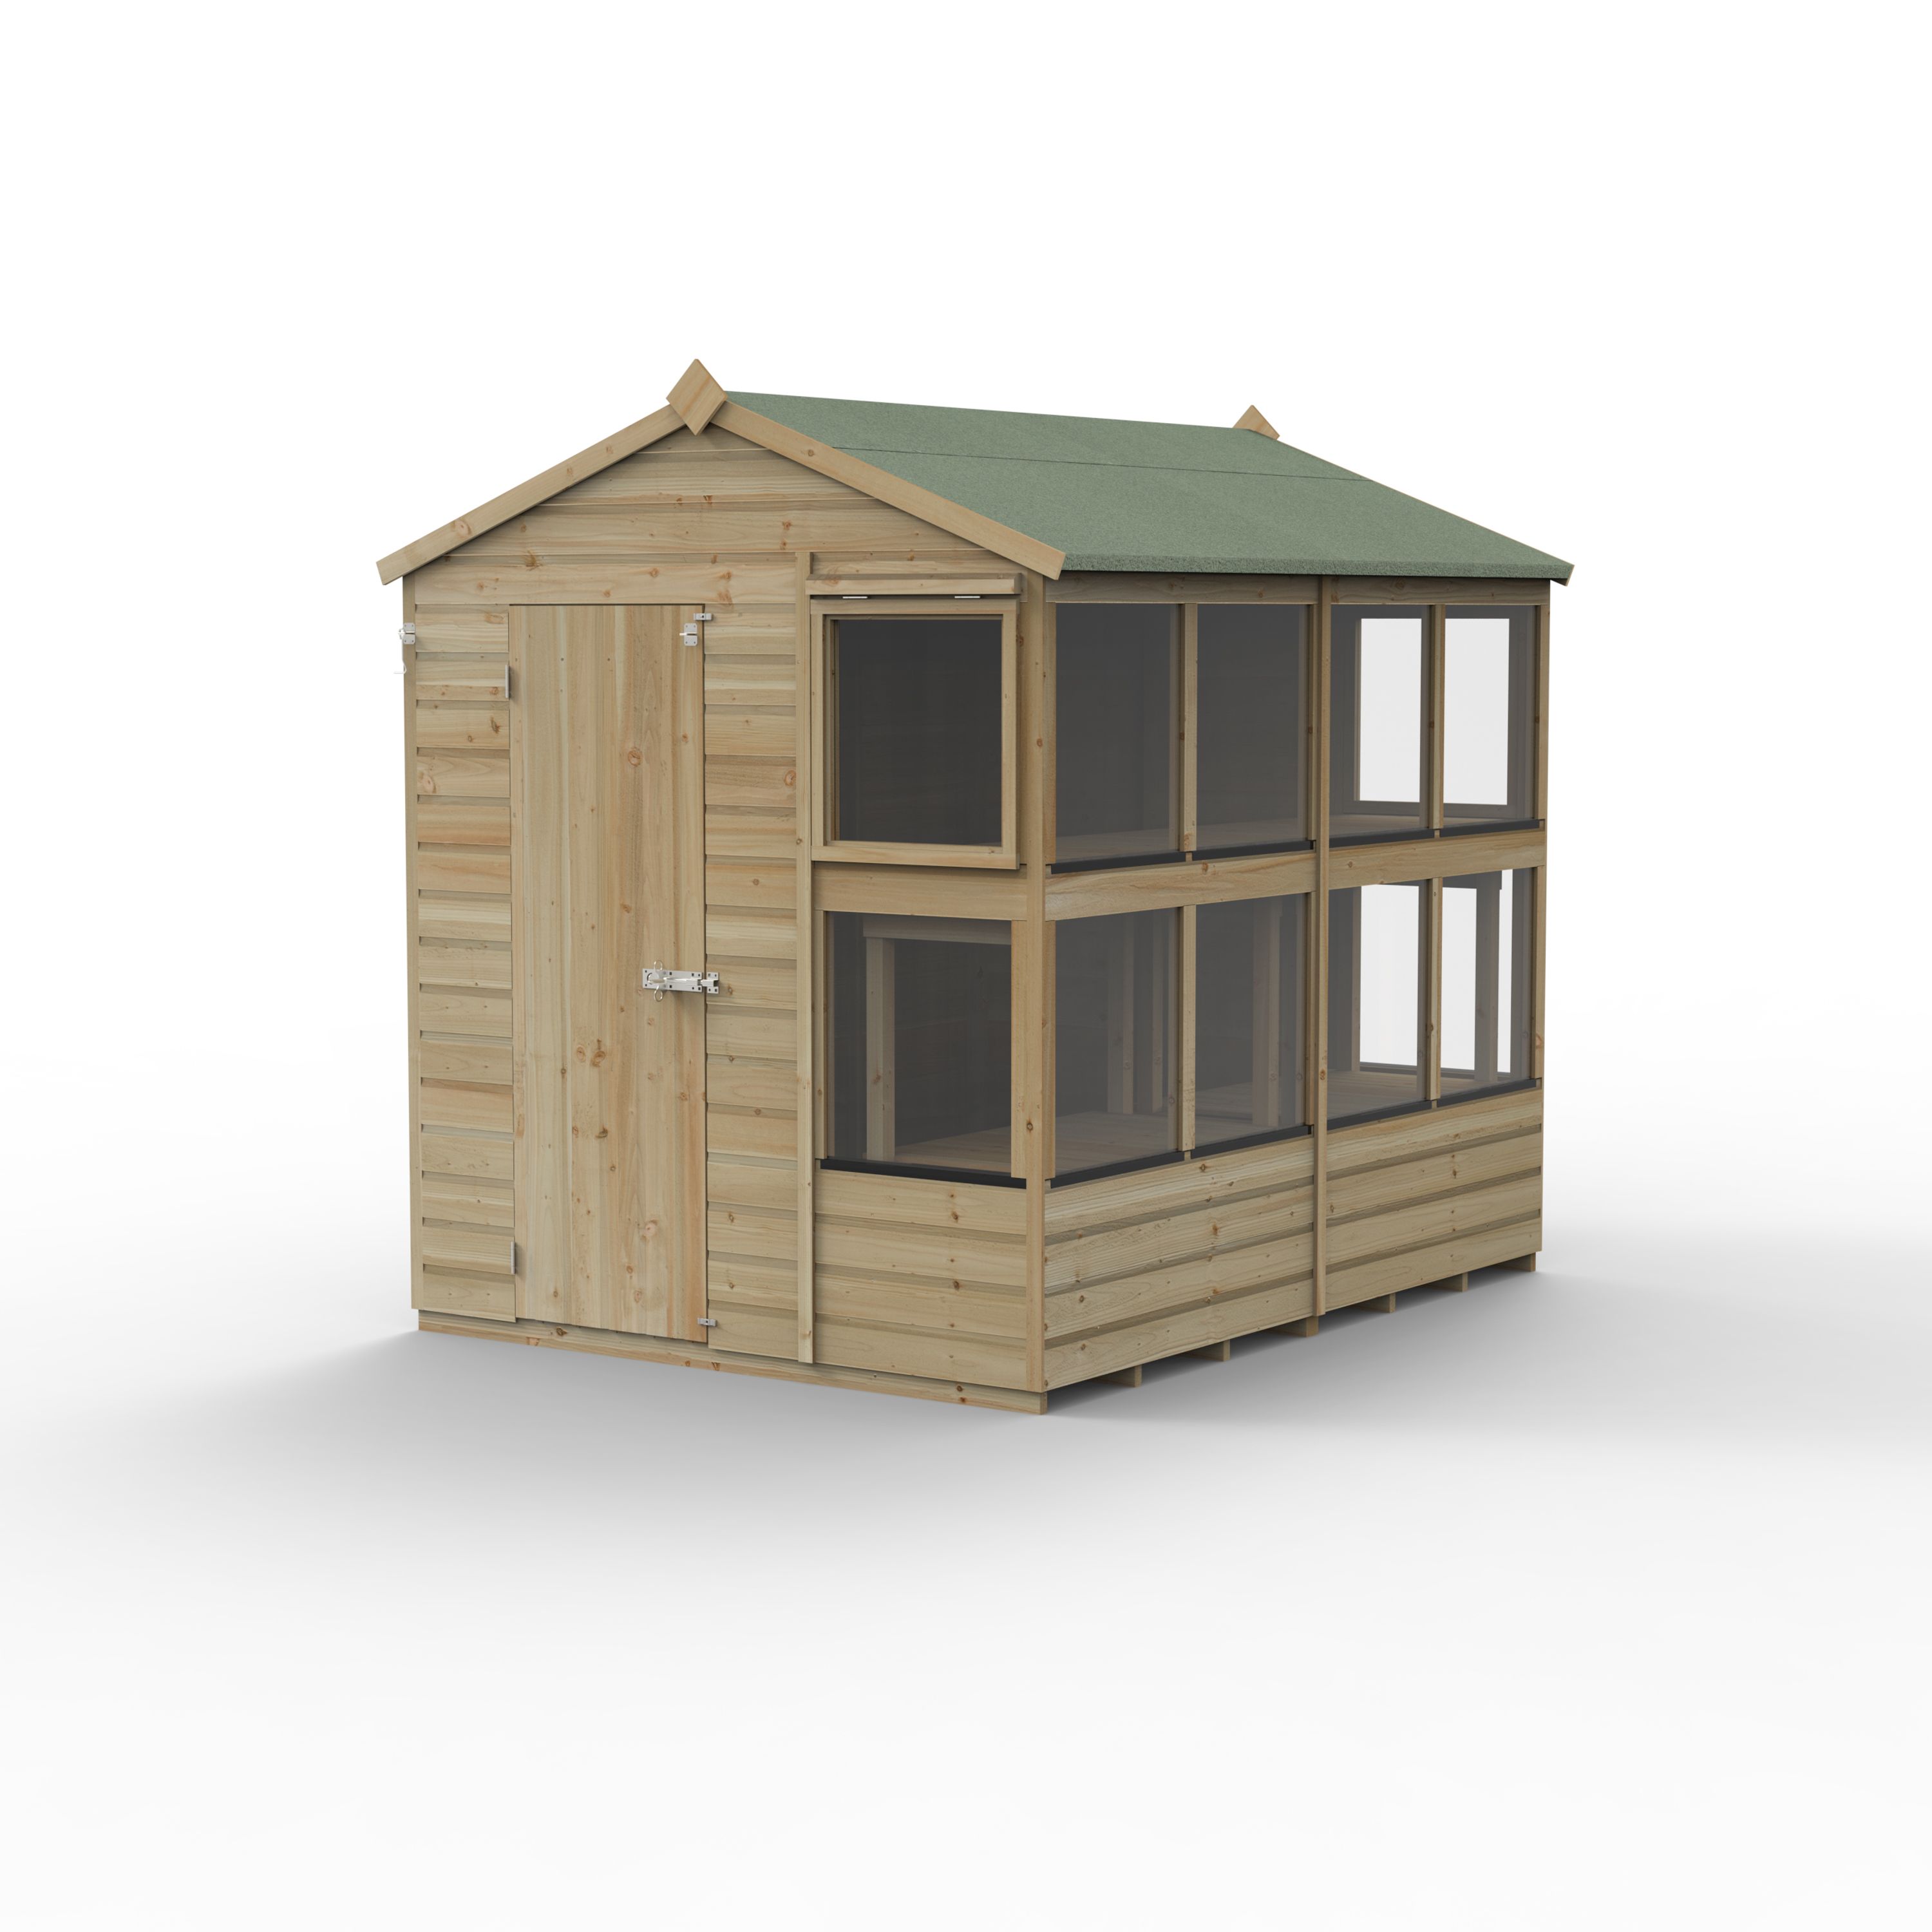 Forest Garden Beckwood 8x6 ft Apex Natural timber Wooden Potting shed with floor & 10 windows - Assembly not required